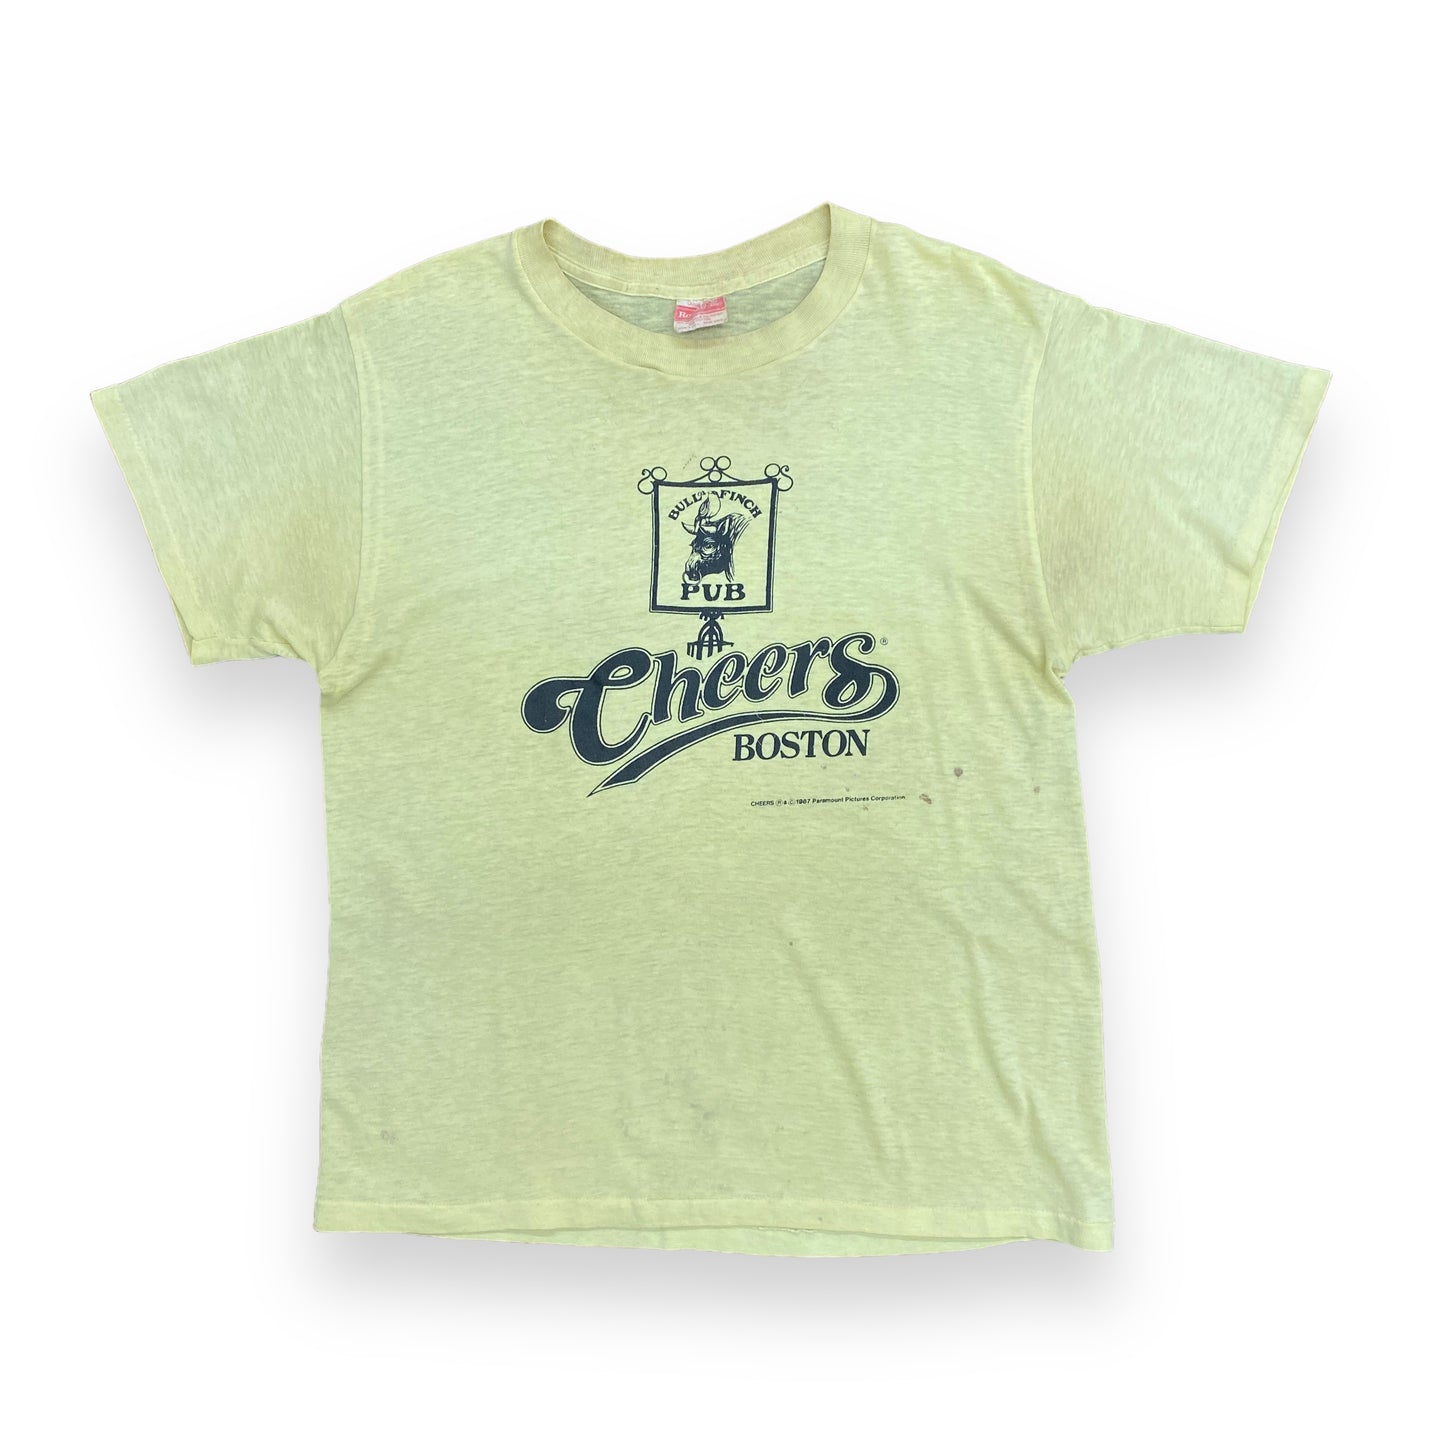 Vintage 1980s "Cheers" Bull Finch Pub Tee - Size Large